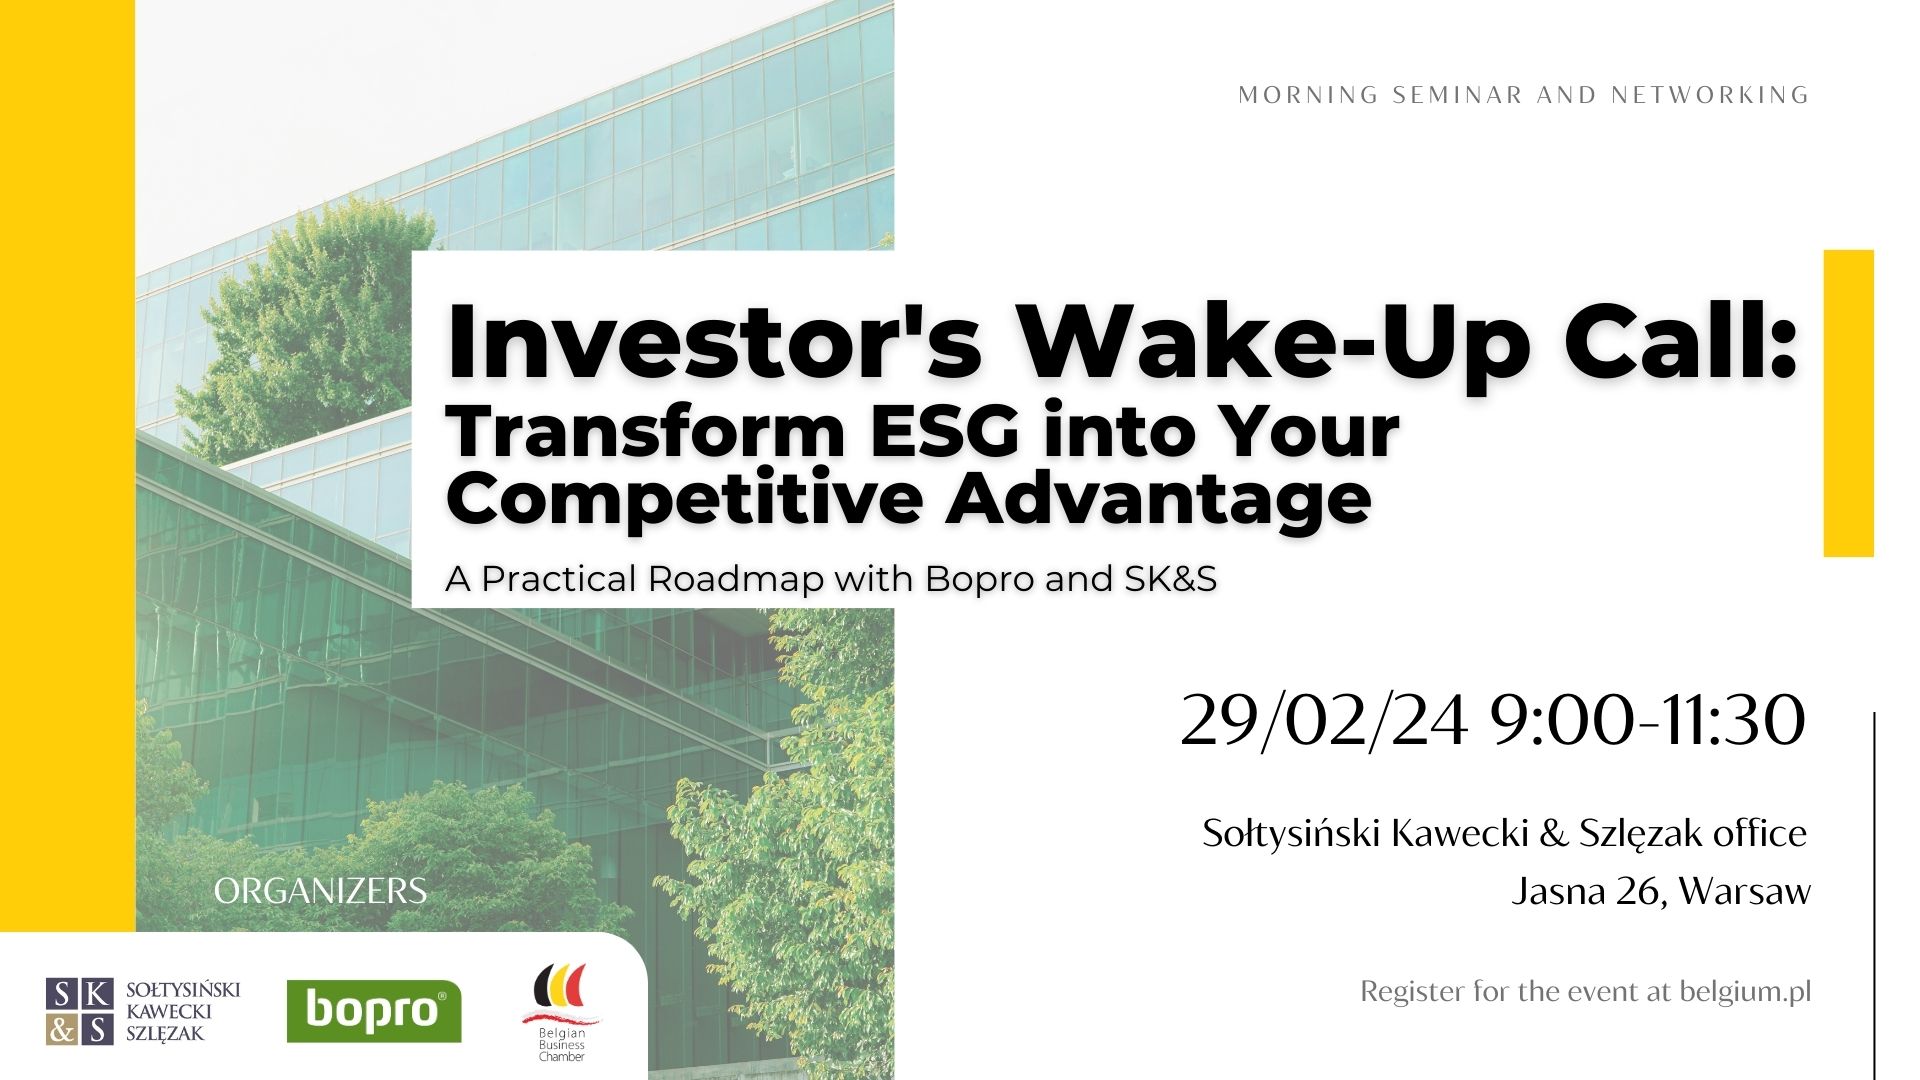 Investor's Wake-Up Call: Transform ESG into Your Competitive Advantage (A Practical Roadmap with Bopro and SK&S) | BBC x PARTNERS | WARSAW